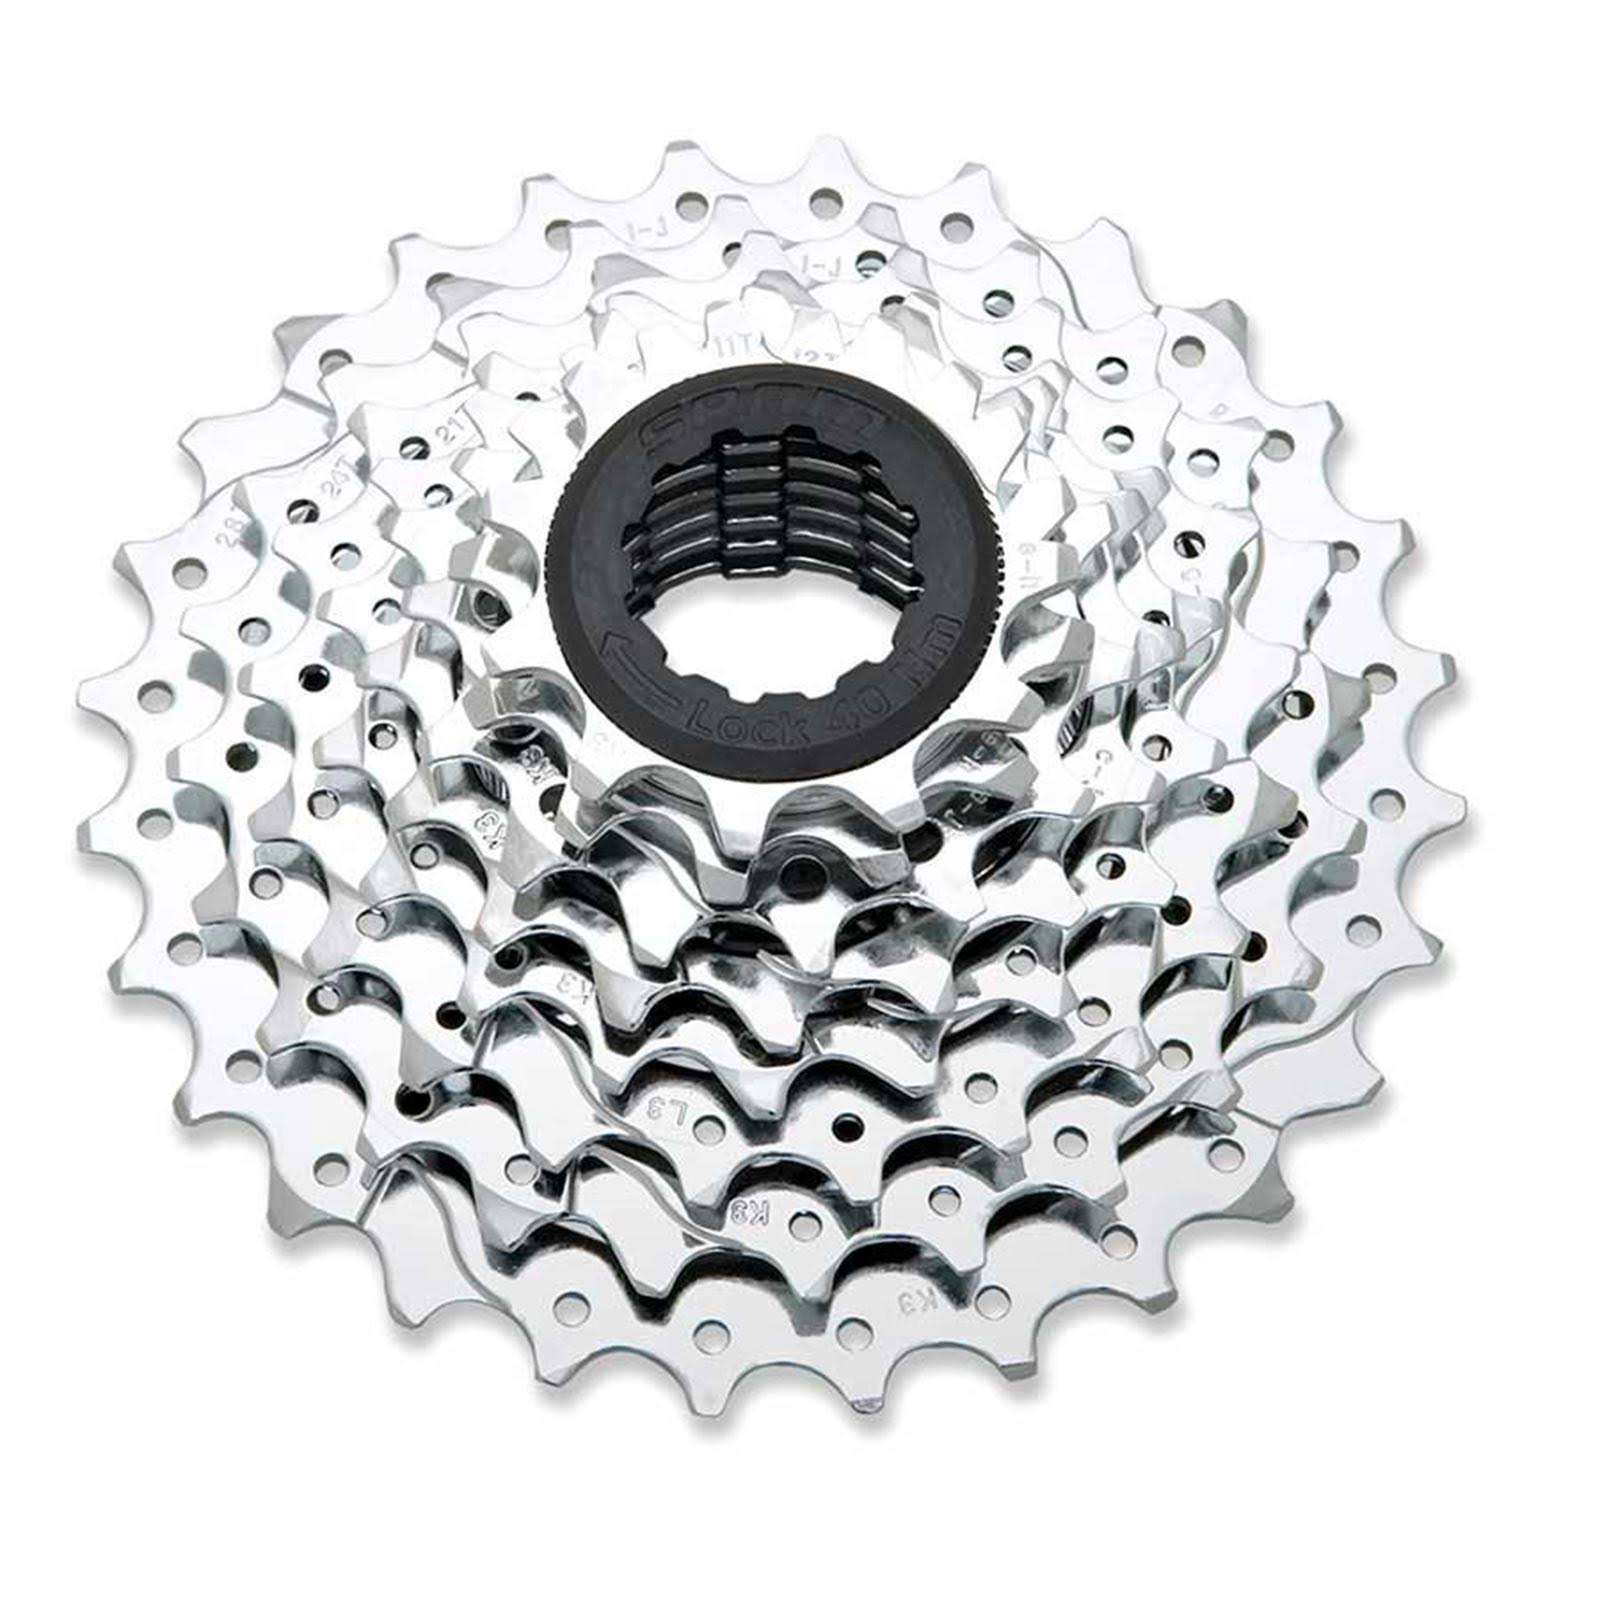 Sram PG-850 8-Speed Road Bicycle Cassette